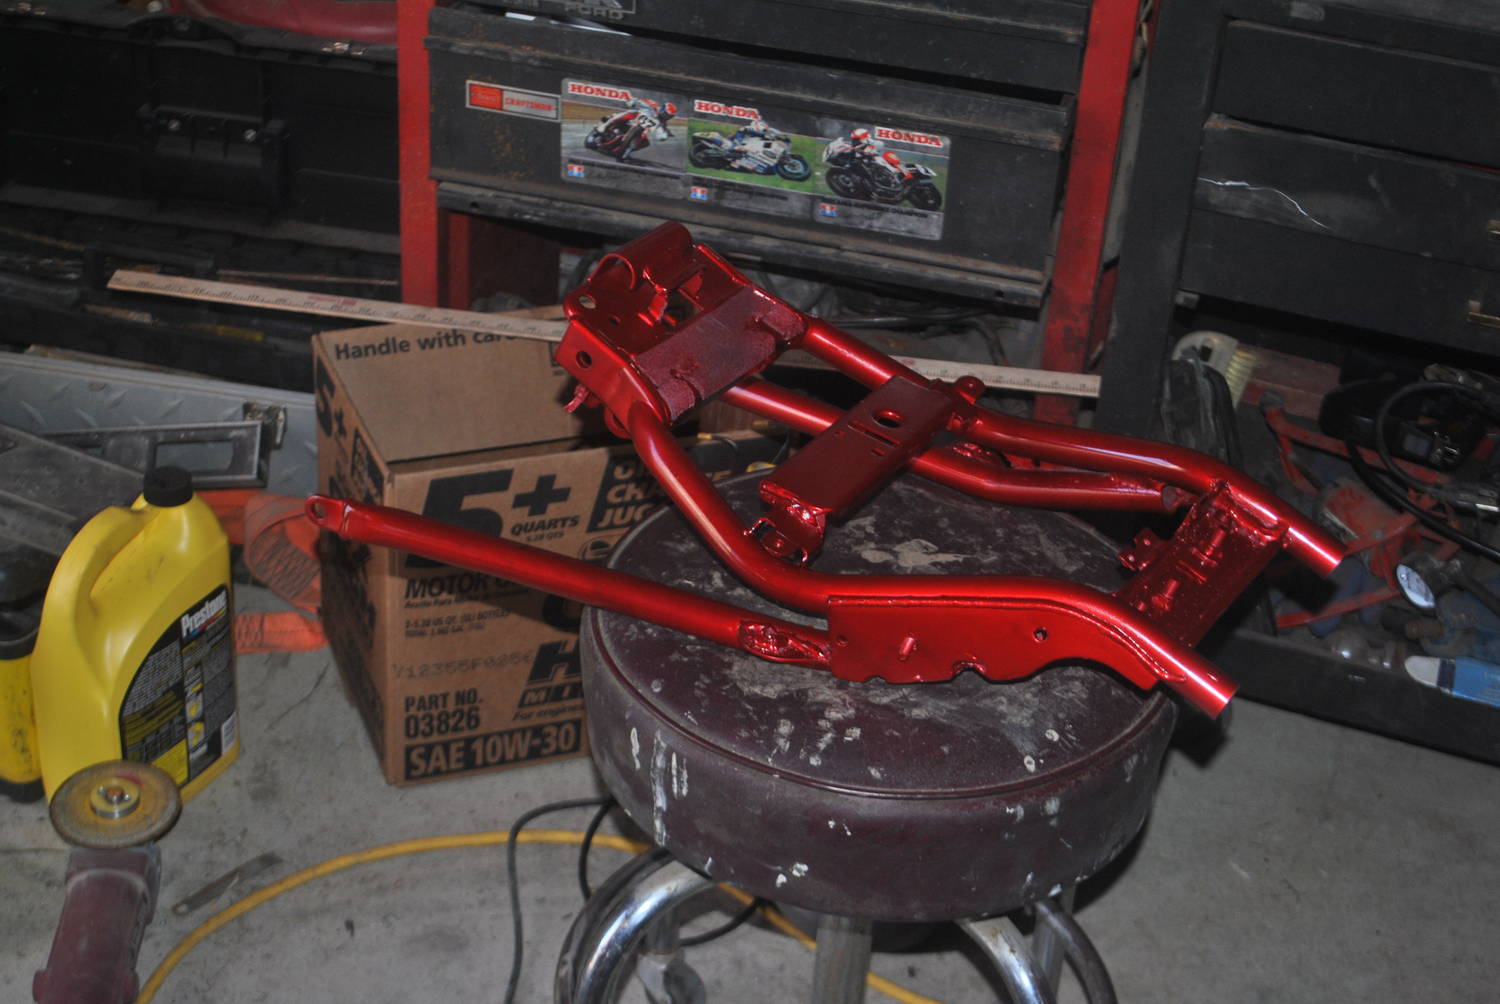 Modified seat frame